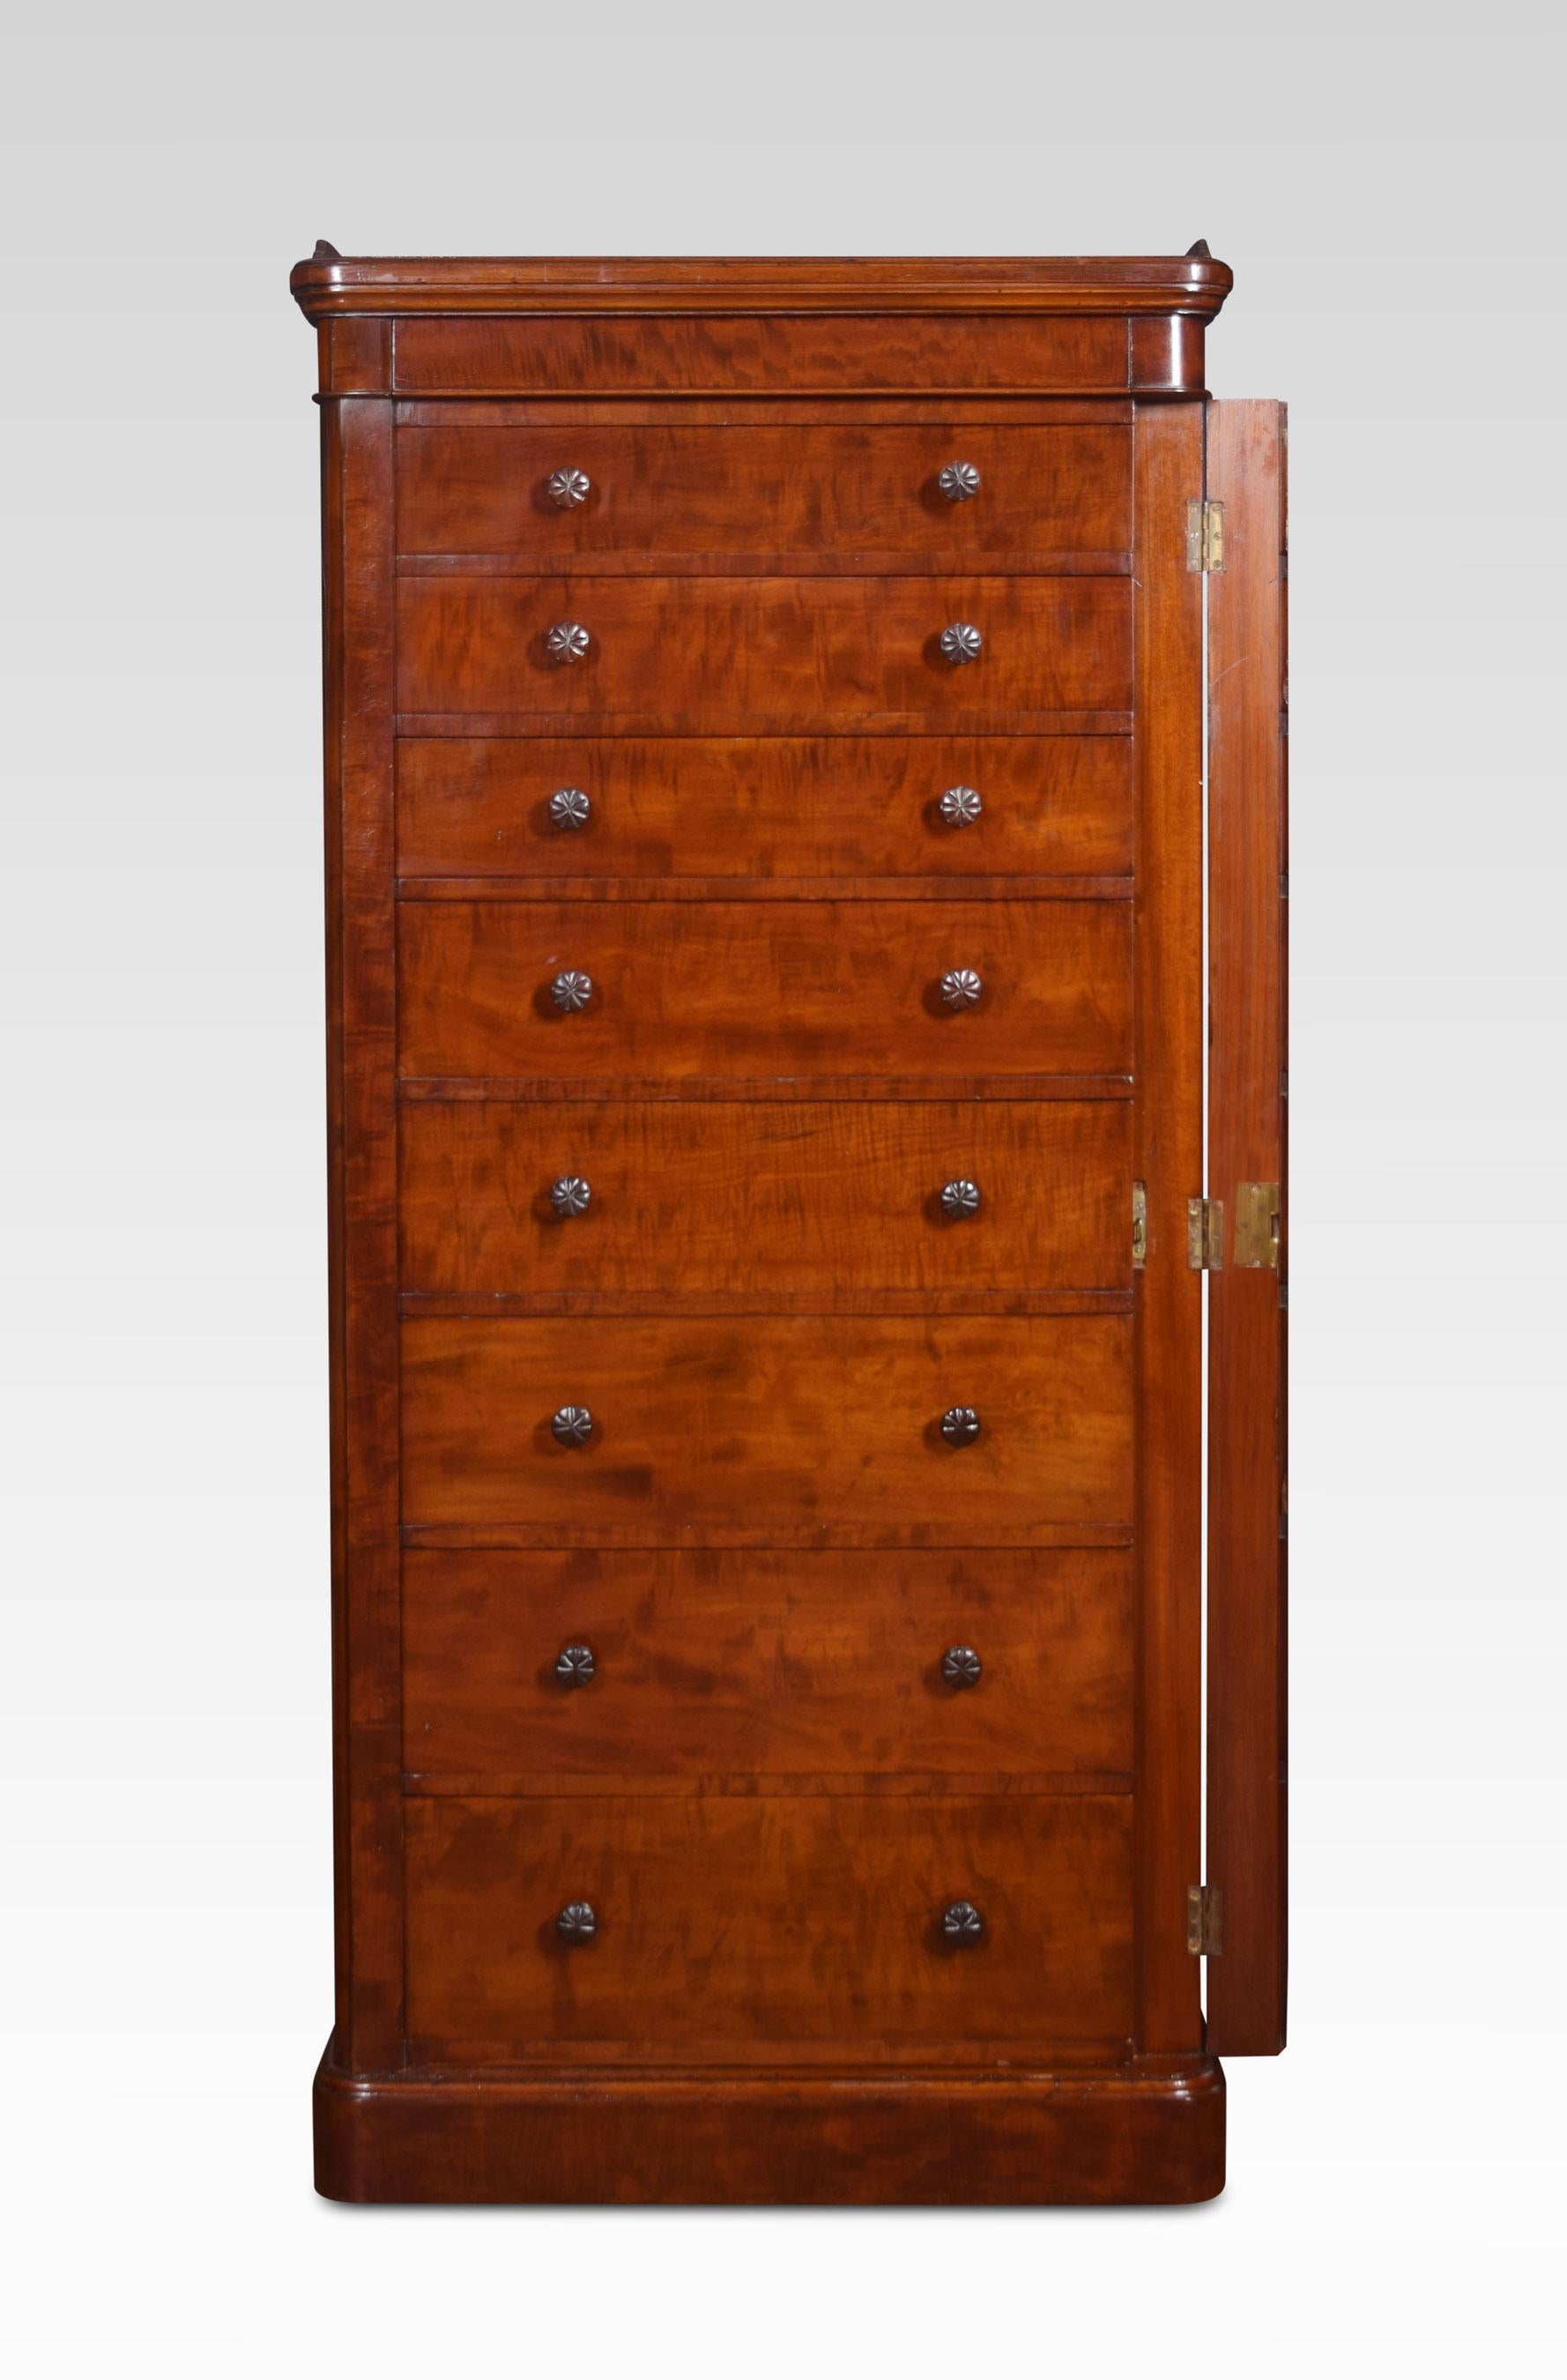 Mahogany Wellington chest having raised three-quarter galley above nine graduated drawers with unusual secret drawer at the top. The right-hand pilaster hinged to act as the traditional “Wellington” chest locking mechanism. all raised up on a plinth